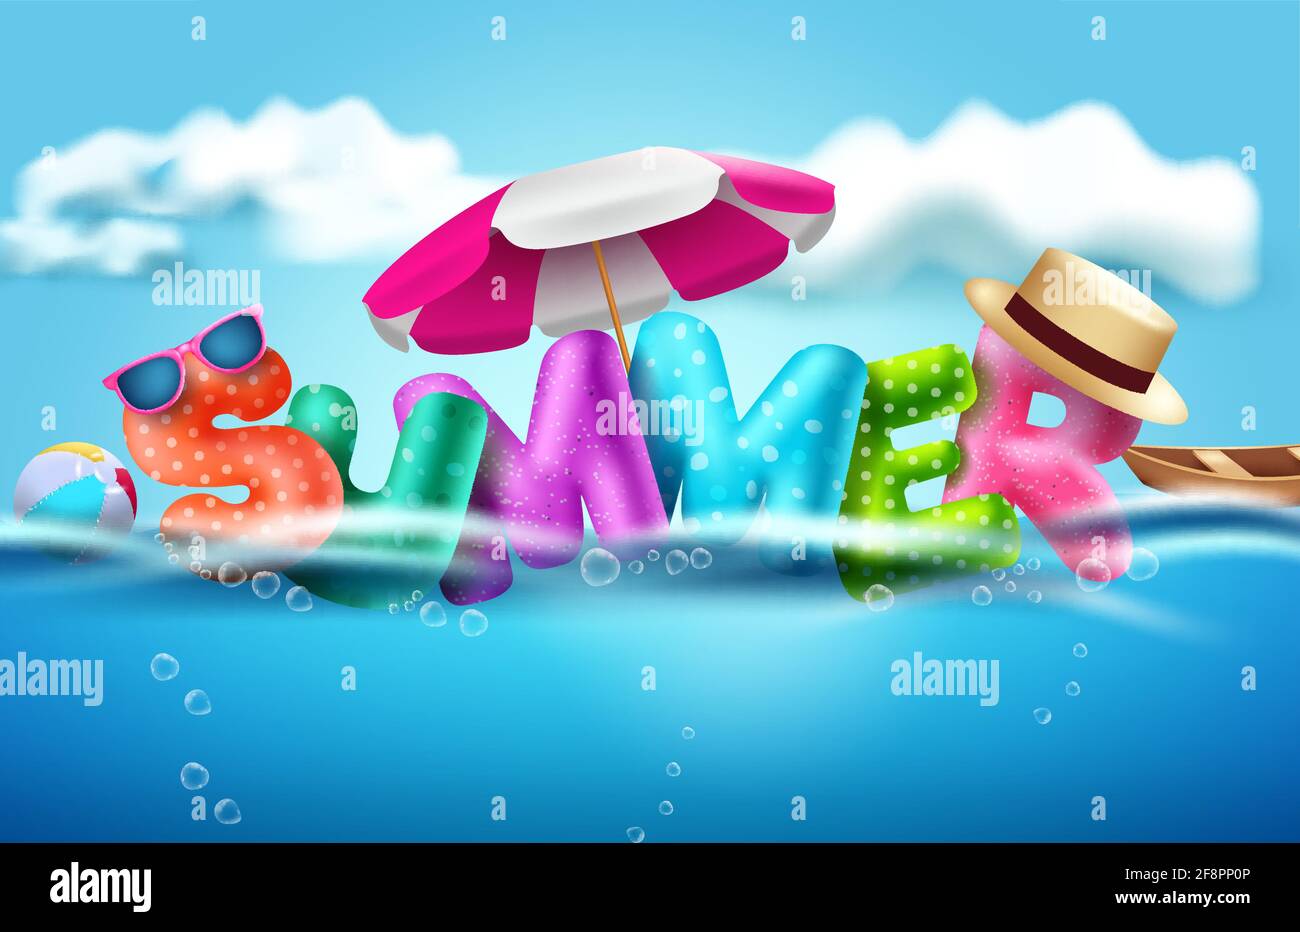 Summer 3d text vector banner design. Summer text in sea background with beach element like umbrella, sunglasses and hat for relax outdoor holiday. Stock Vector